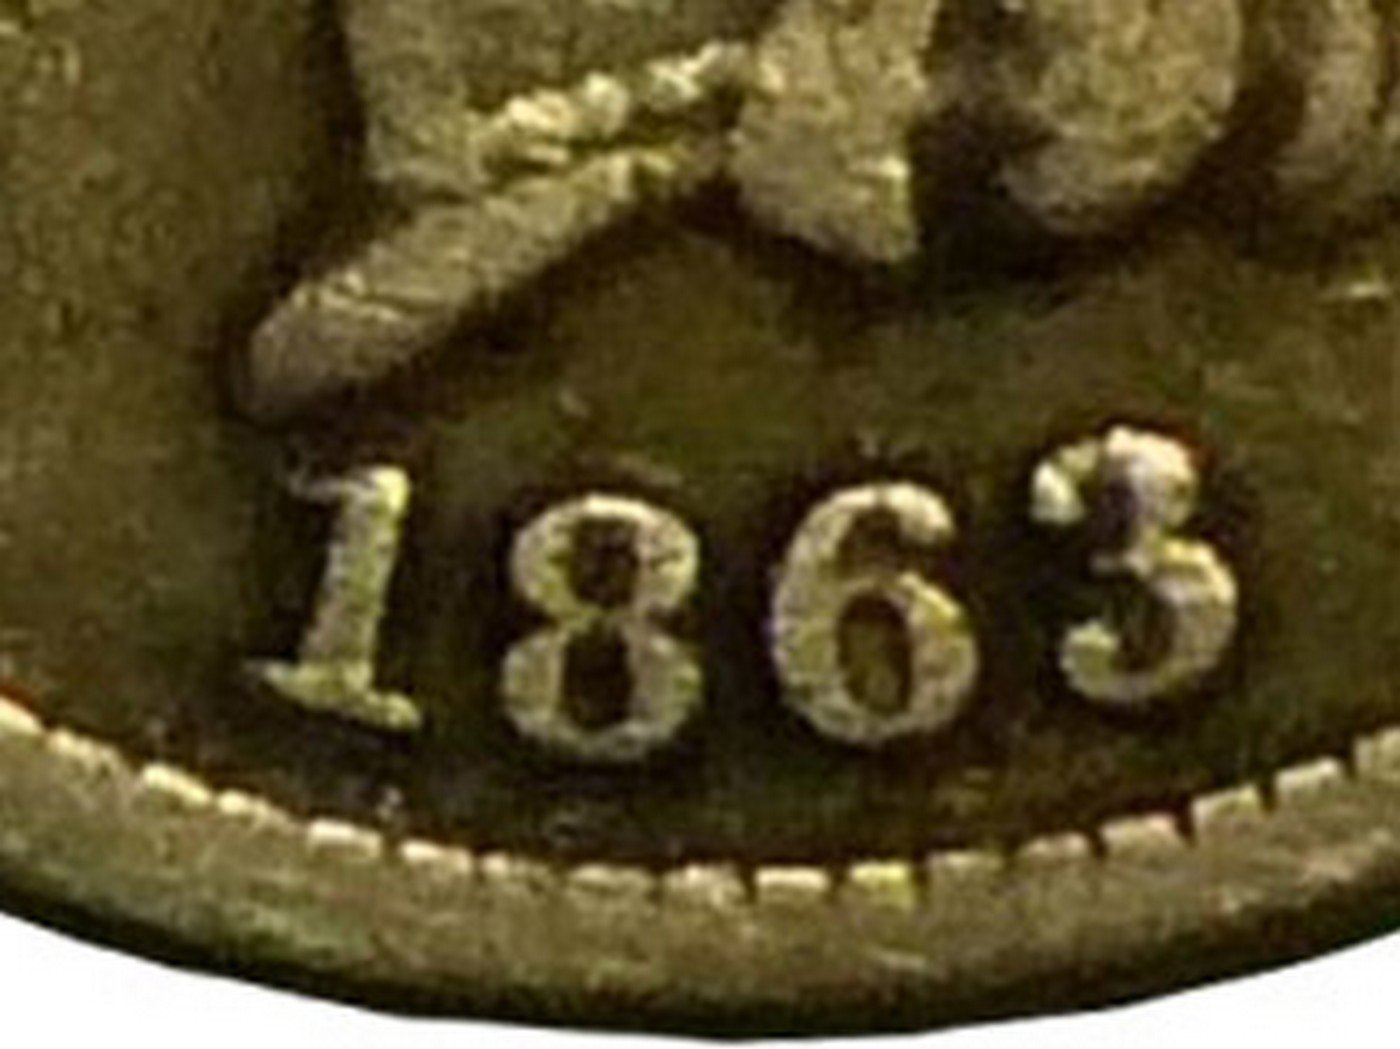 Obverse of 1863 CUD-009 - Indian Head Penny - Photo by David Poliquin